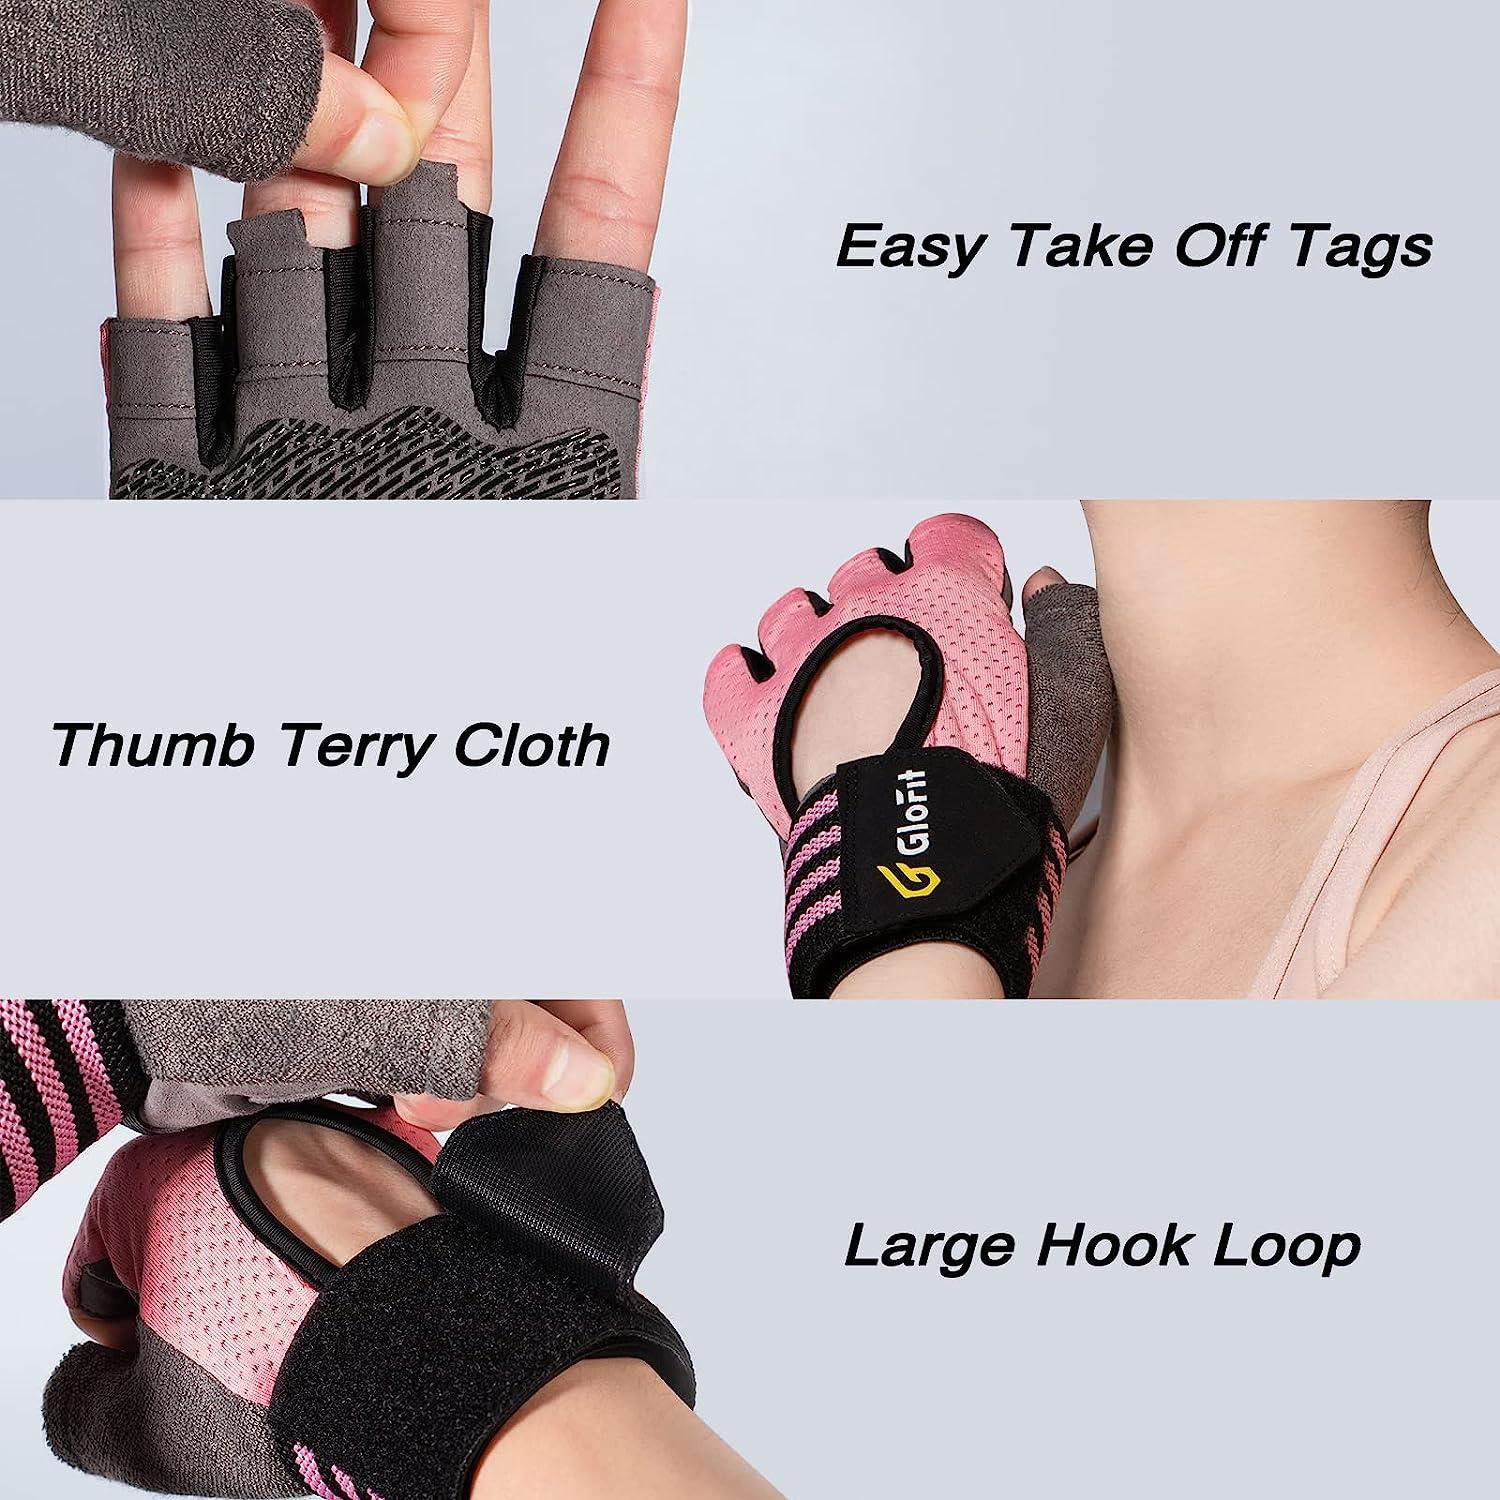 New Grippy No-Slip Cross Training Gloves with Wrist Support for